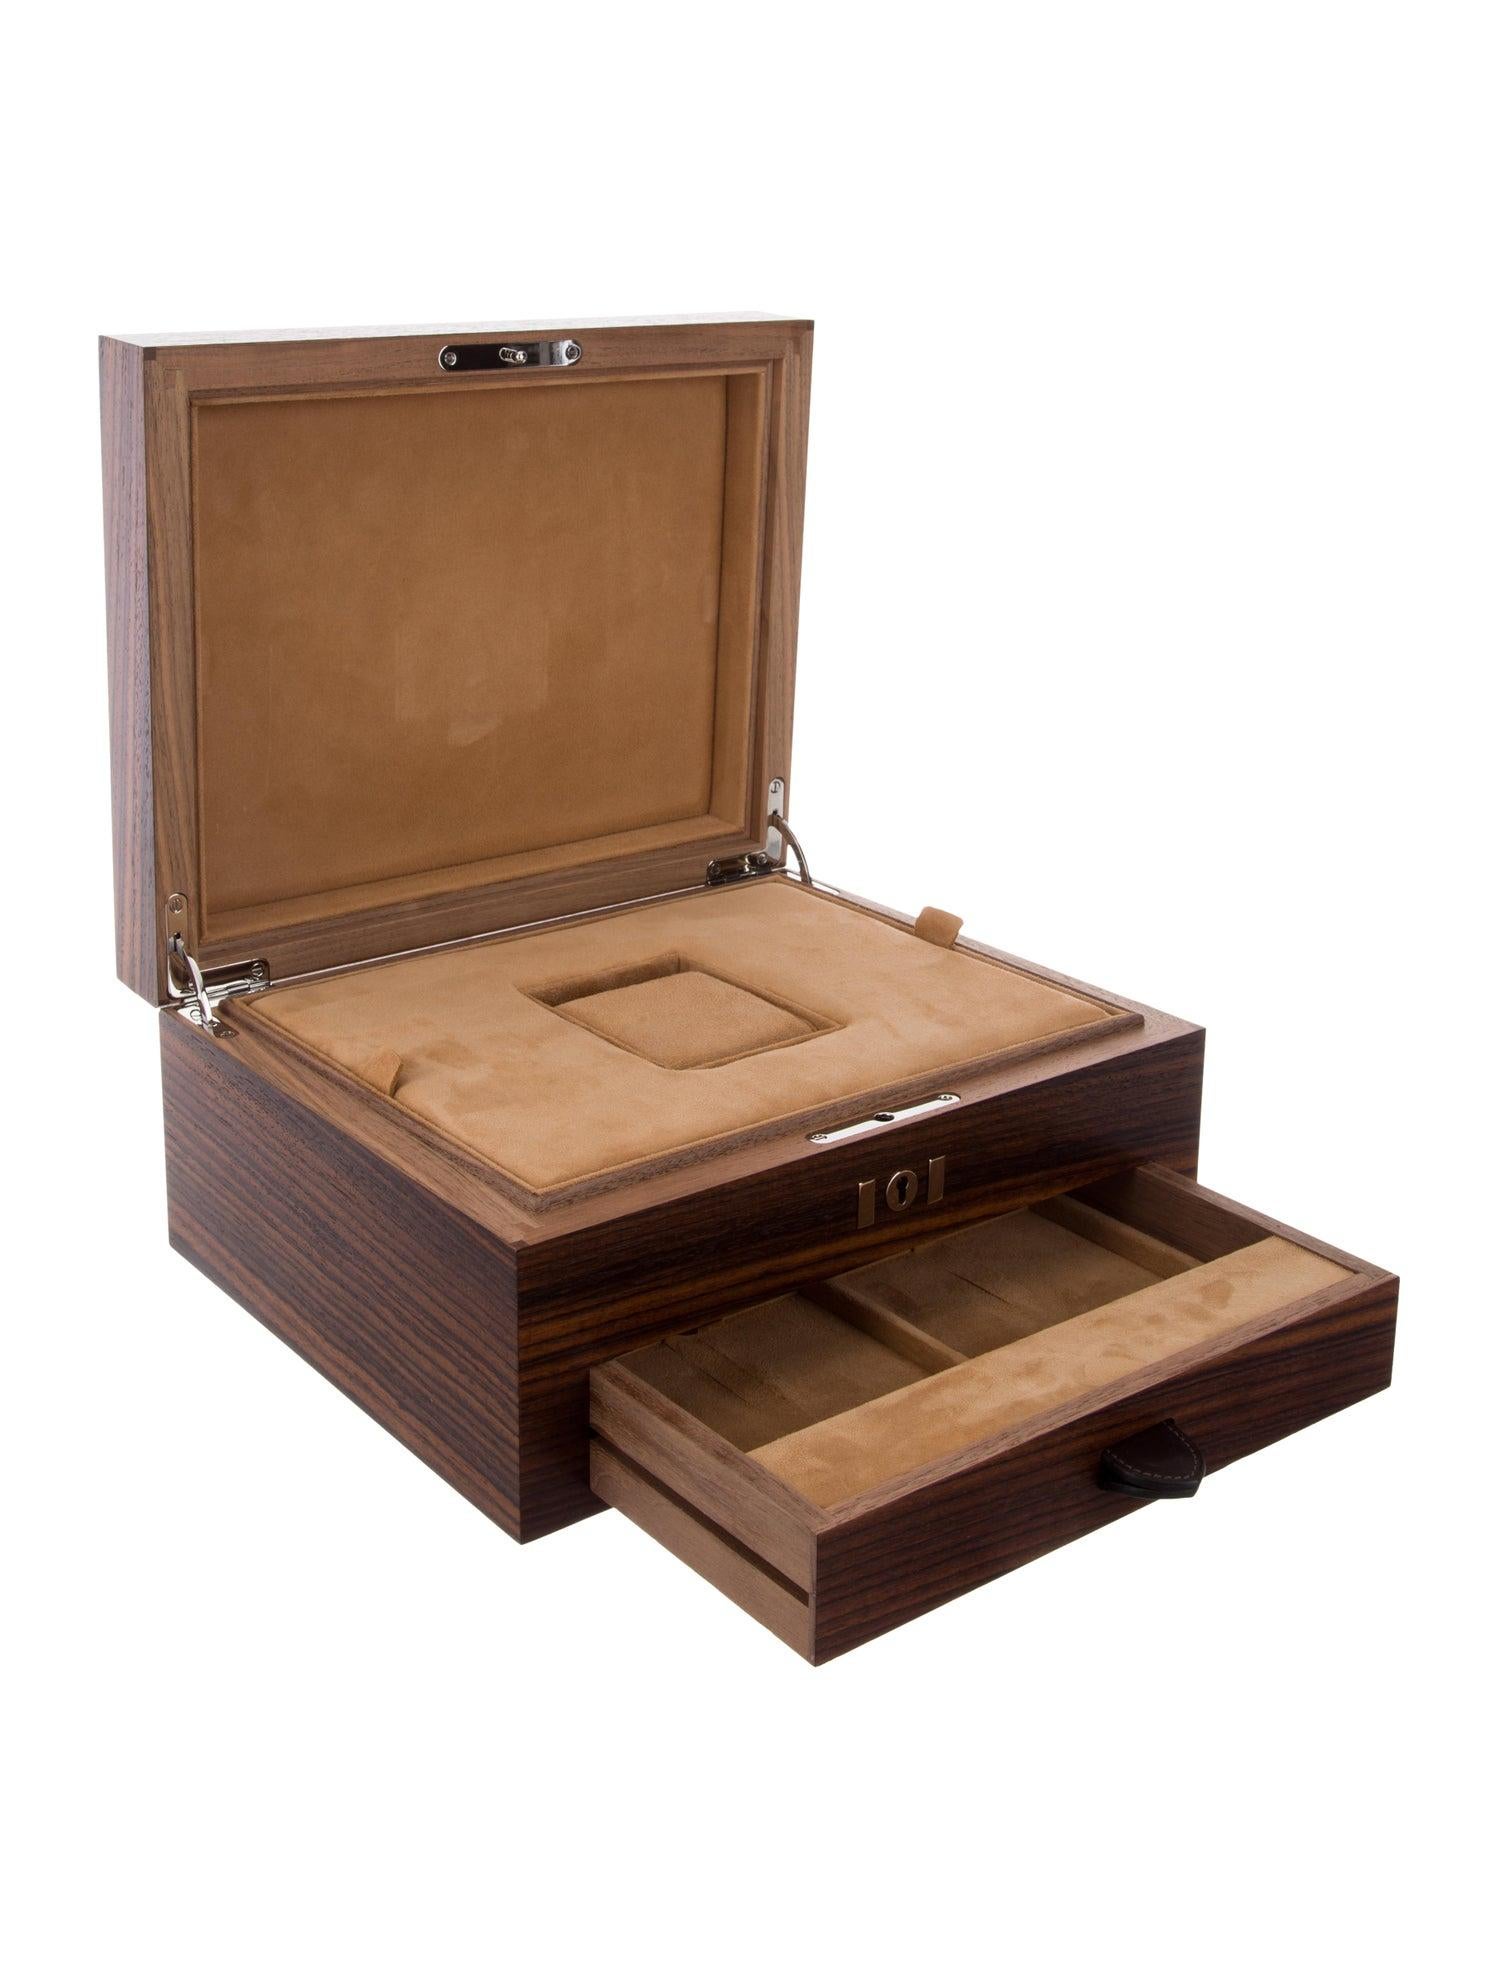 Hermes NEW Brown Wood 'H' Men's Women's Jewelry Vanity Storage Trunk Box in Box

Wood
Suede lining
Features three compartments
Signed Hermes
Includes original key and box